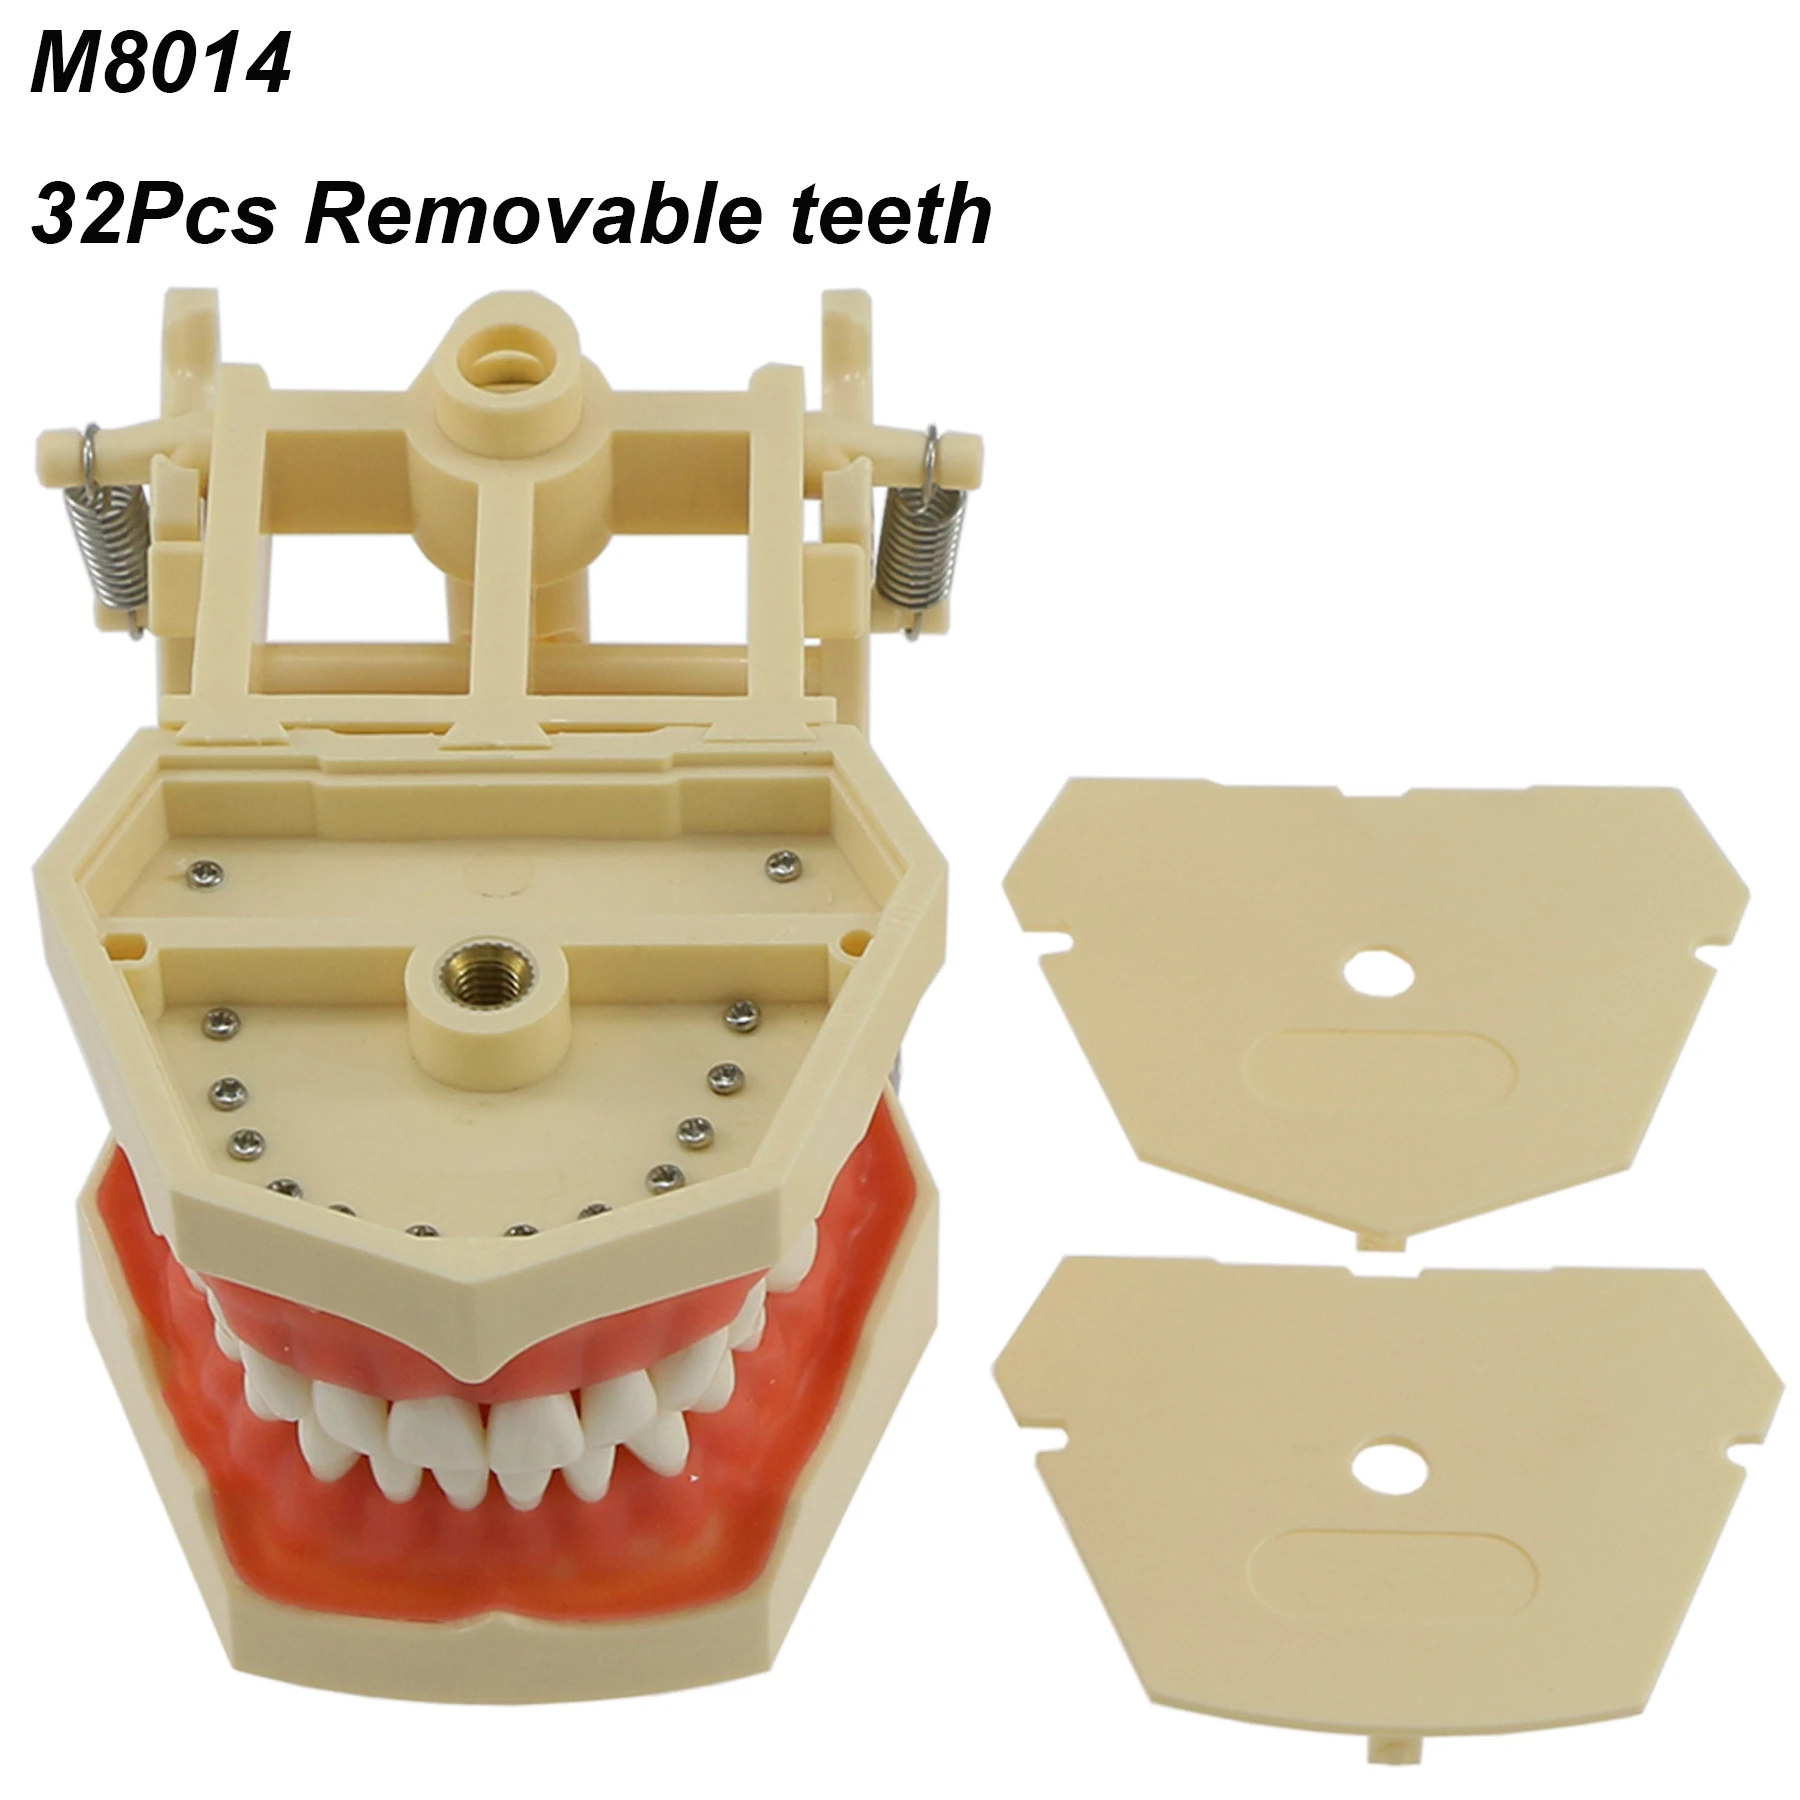 

Dental 32Pcs Removable Standard Practice Screw-in Teeth Model Demo M8014 Filling Fit Frasaco AG Type Typodont Soft Gingivae